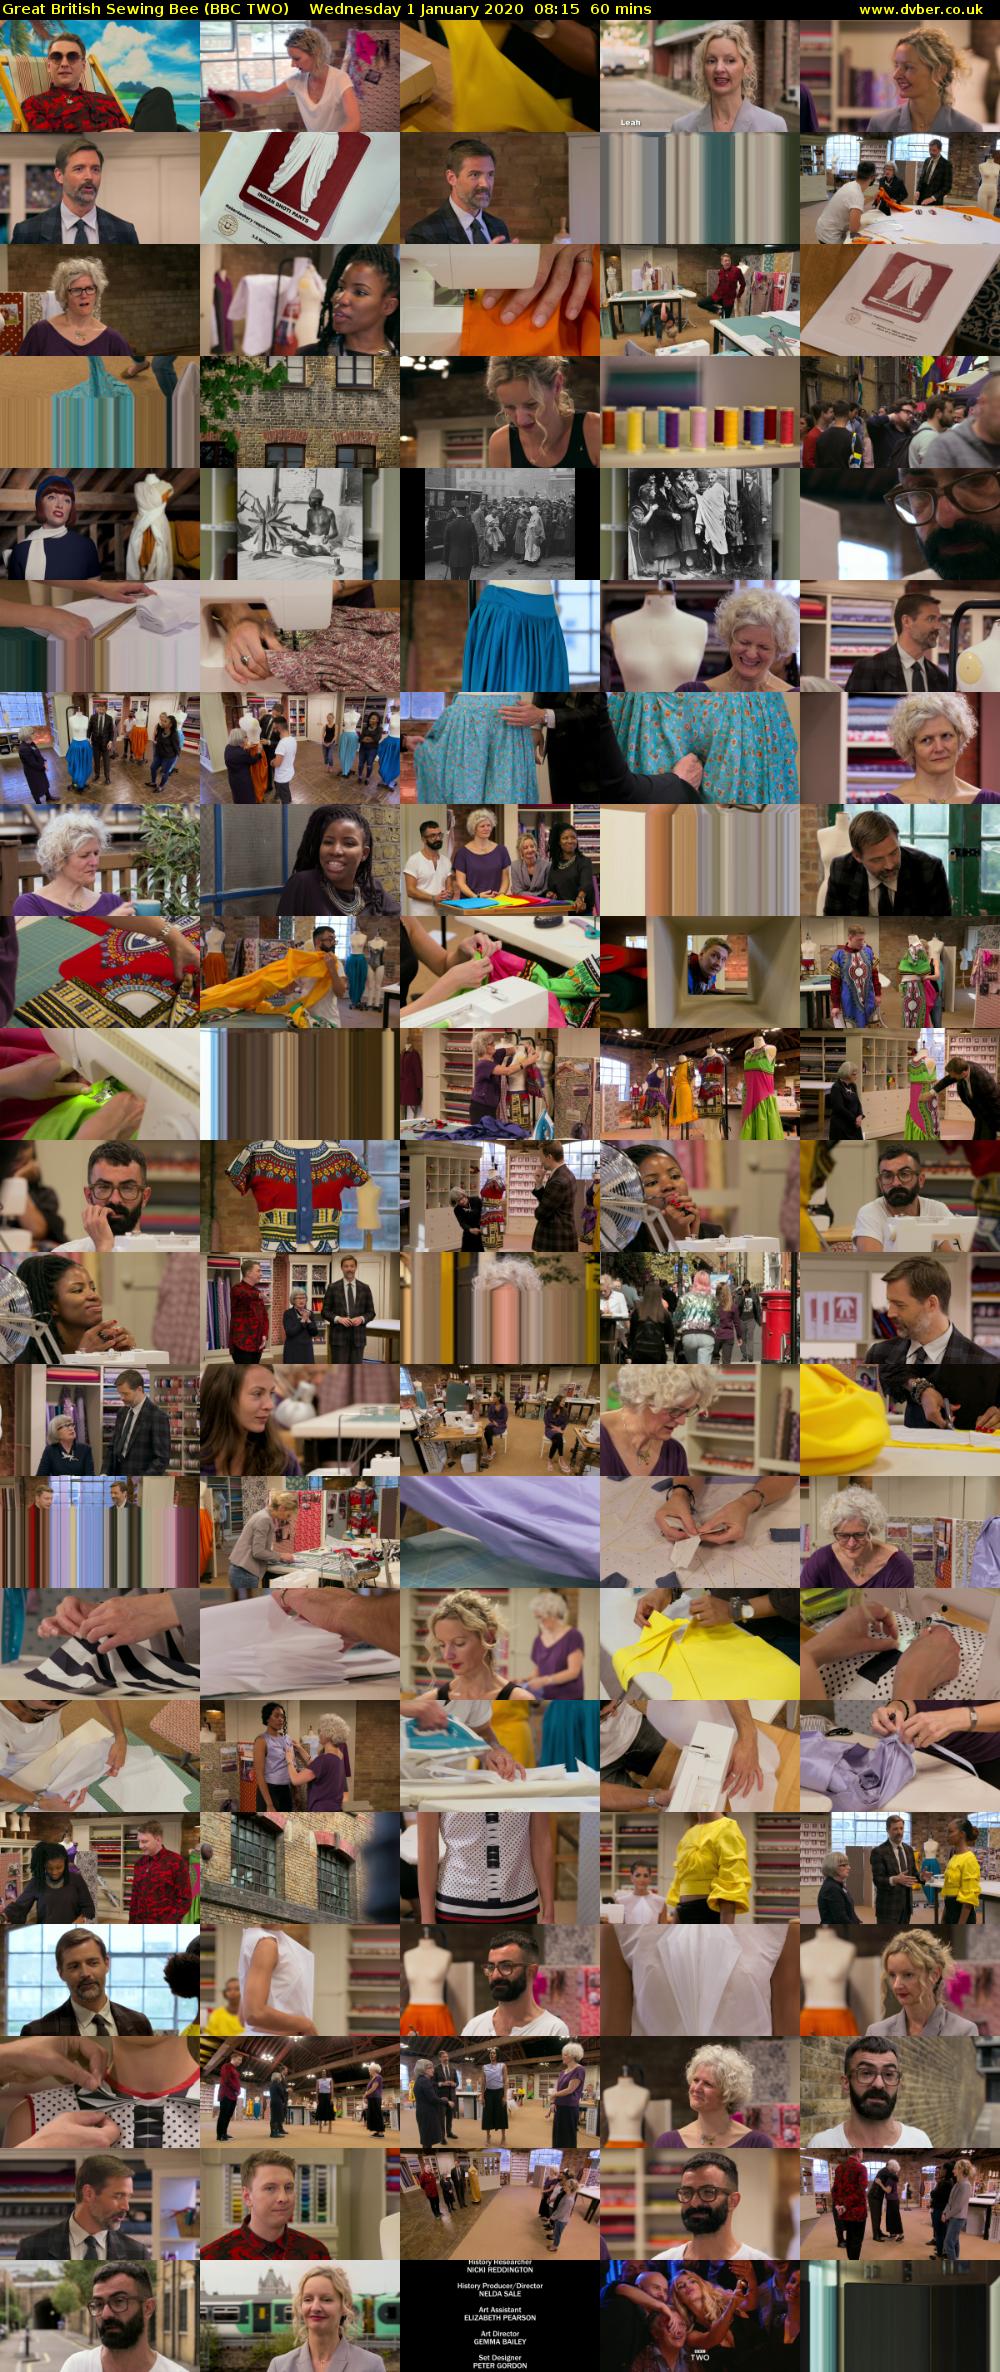 Great British Sewing Bee (BBC TWO) Wednesday 1 January 2020 08:15 - 09:15